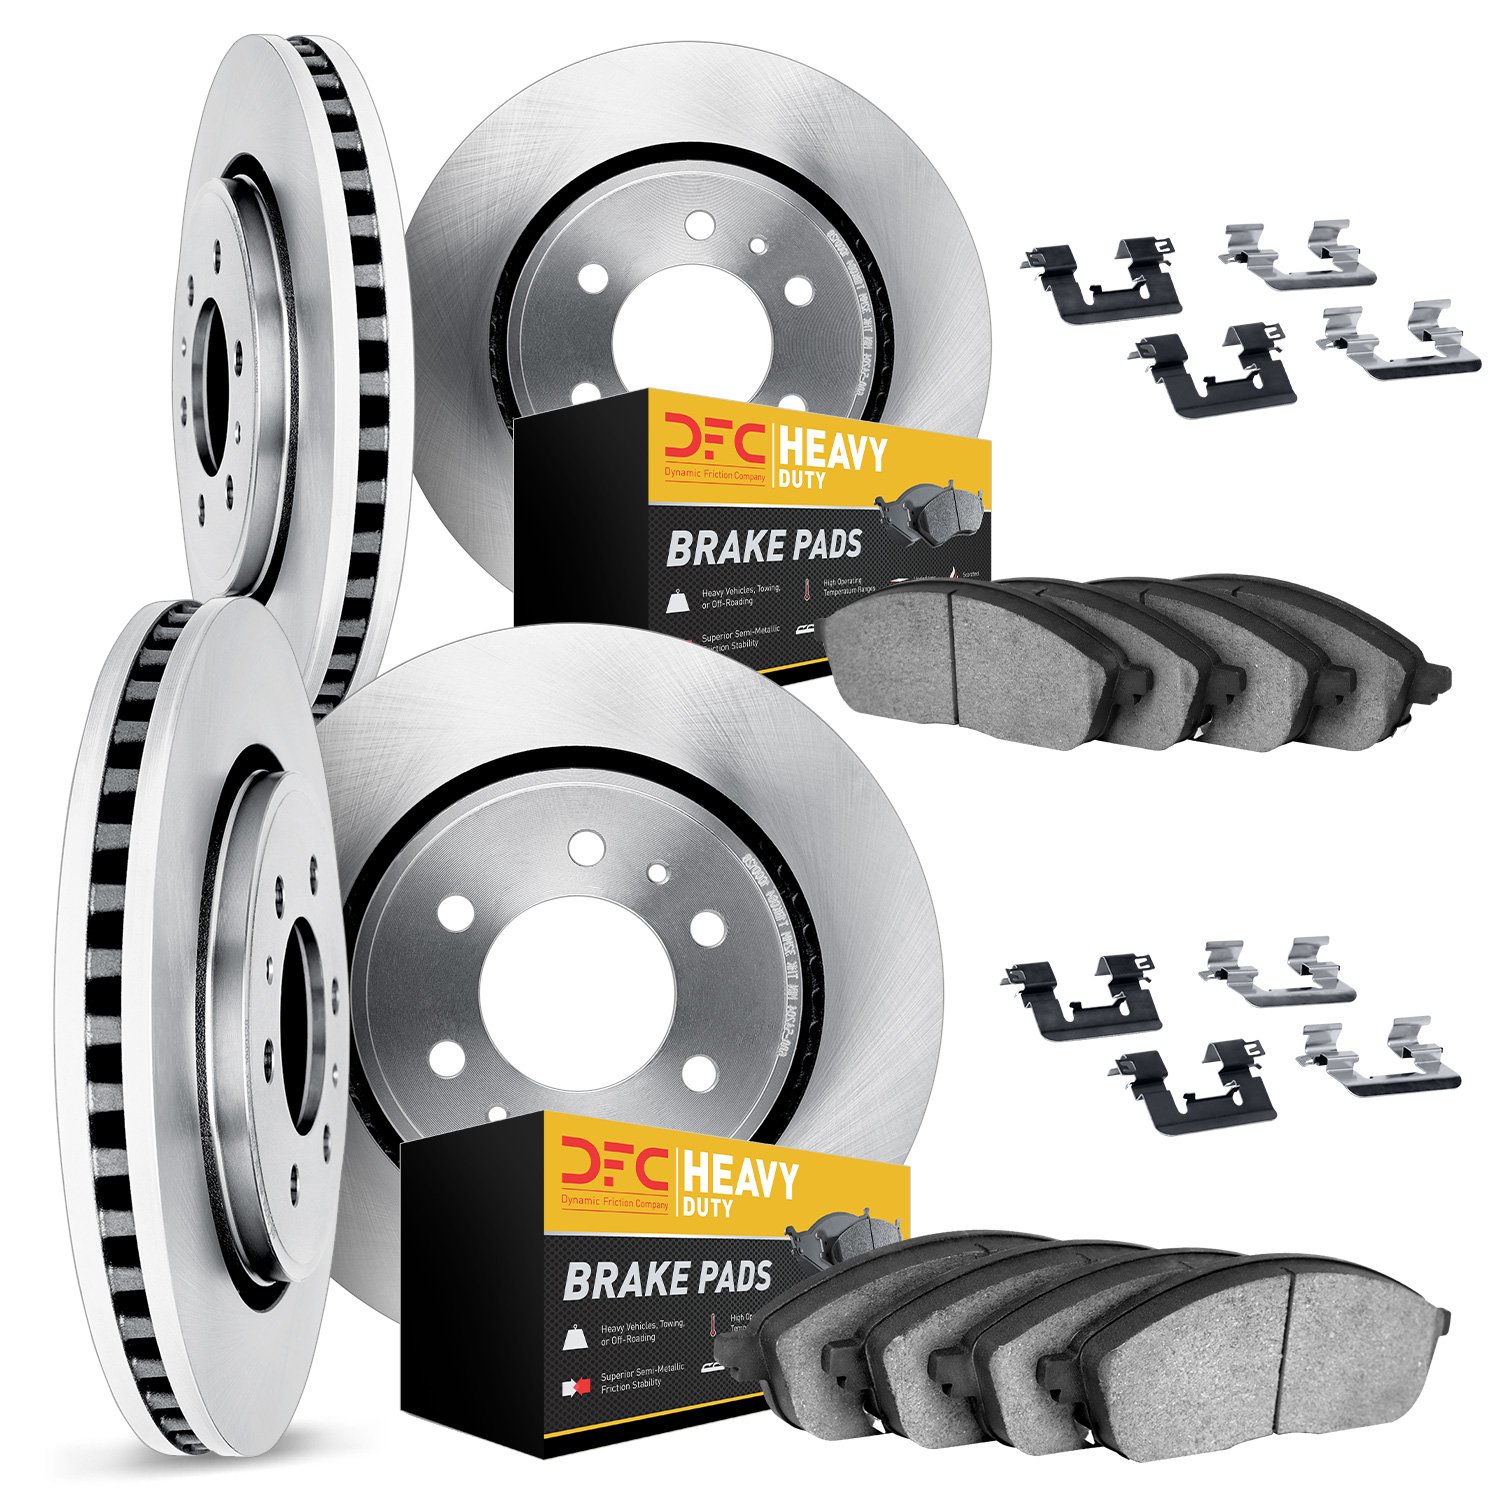 6214-40714 Brake Rotors w/Heavy-Duty Brake Pads Kit & Hardware, Fits Select Multiple Makes/Models, Position: Front and Rear